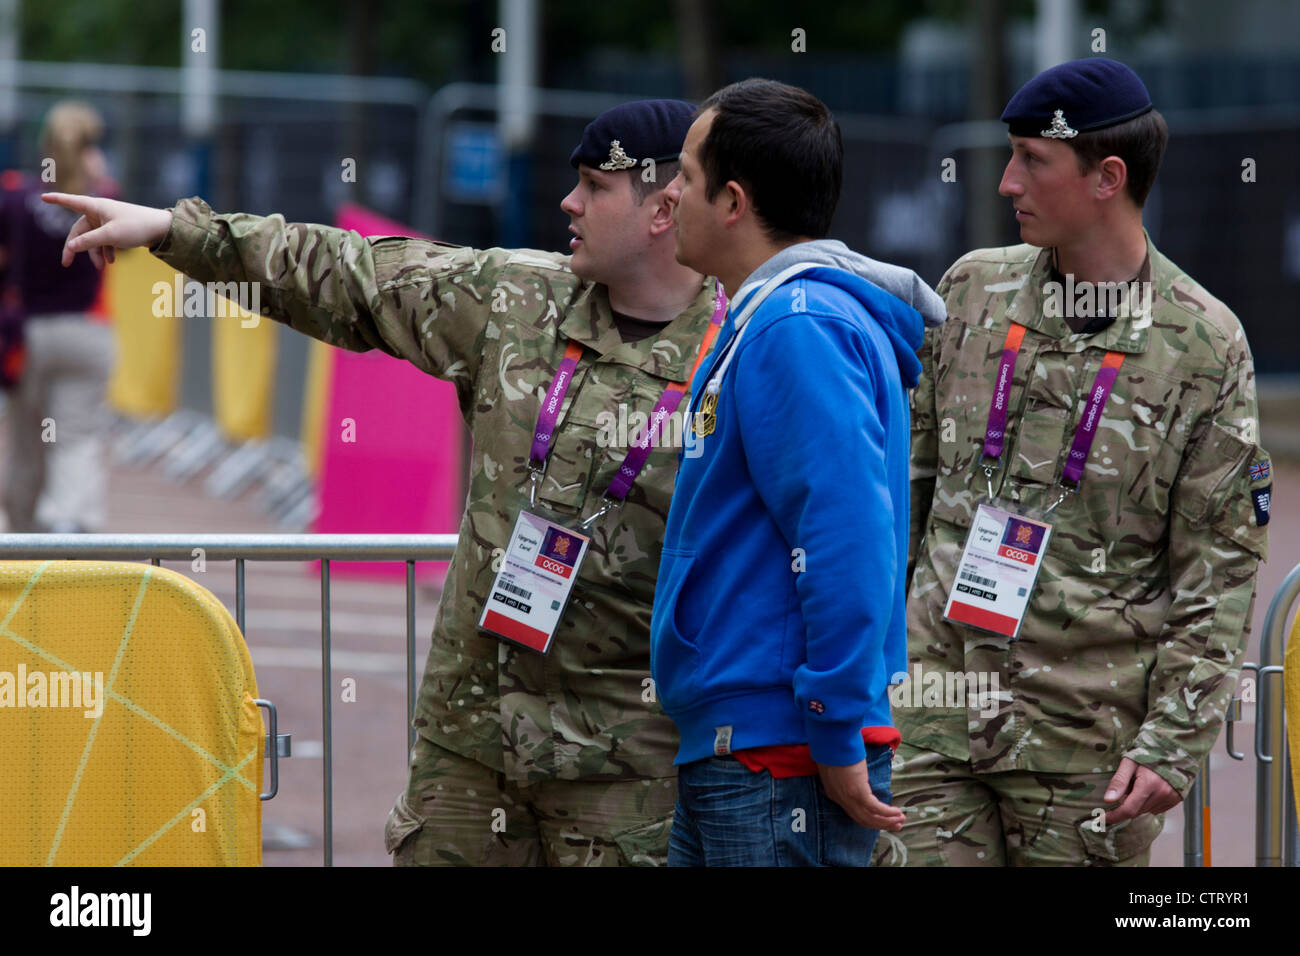 Soldiers of the Royal Artillery regiment in British army direct spectators while standing guard the entrance to the volleyball venue in central London next to the IOC rings logo on day 4 of the London 2012 Olympic Games. A further 1,200 military personnel are being deployed to help secure the 2012 Olympics in London following the failure by security contractor G4S to provide enough private guards. The extra personnel have been drafted in amid continuing fears that the private security contractor's handling of the £284m contract remains a risk to the Games. Stock Photo